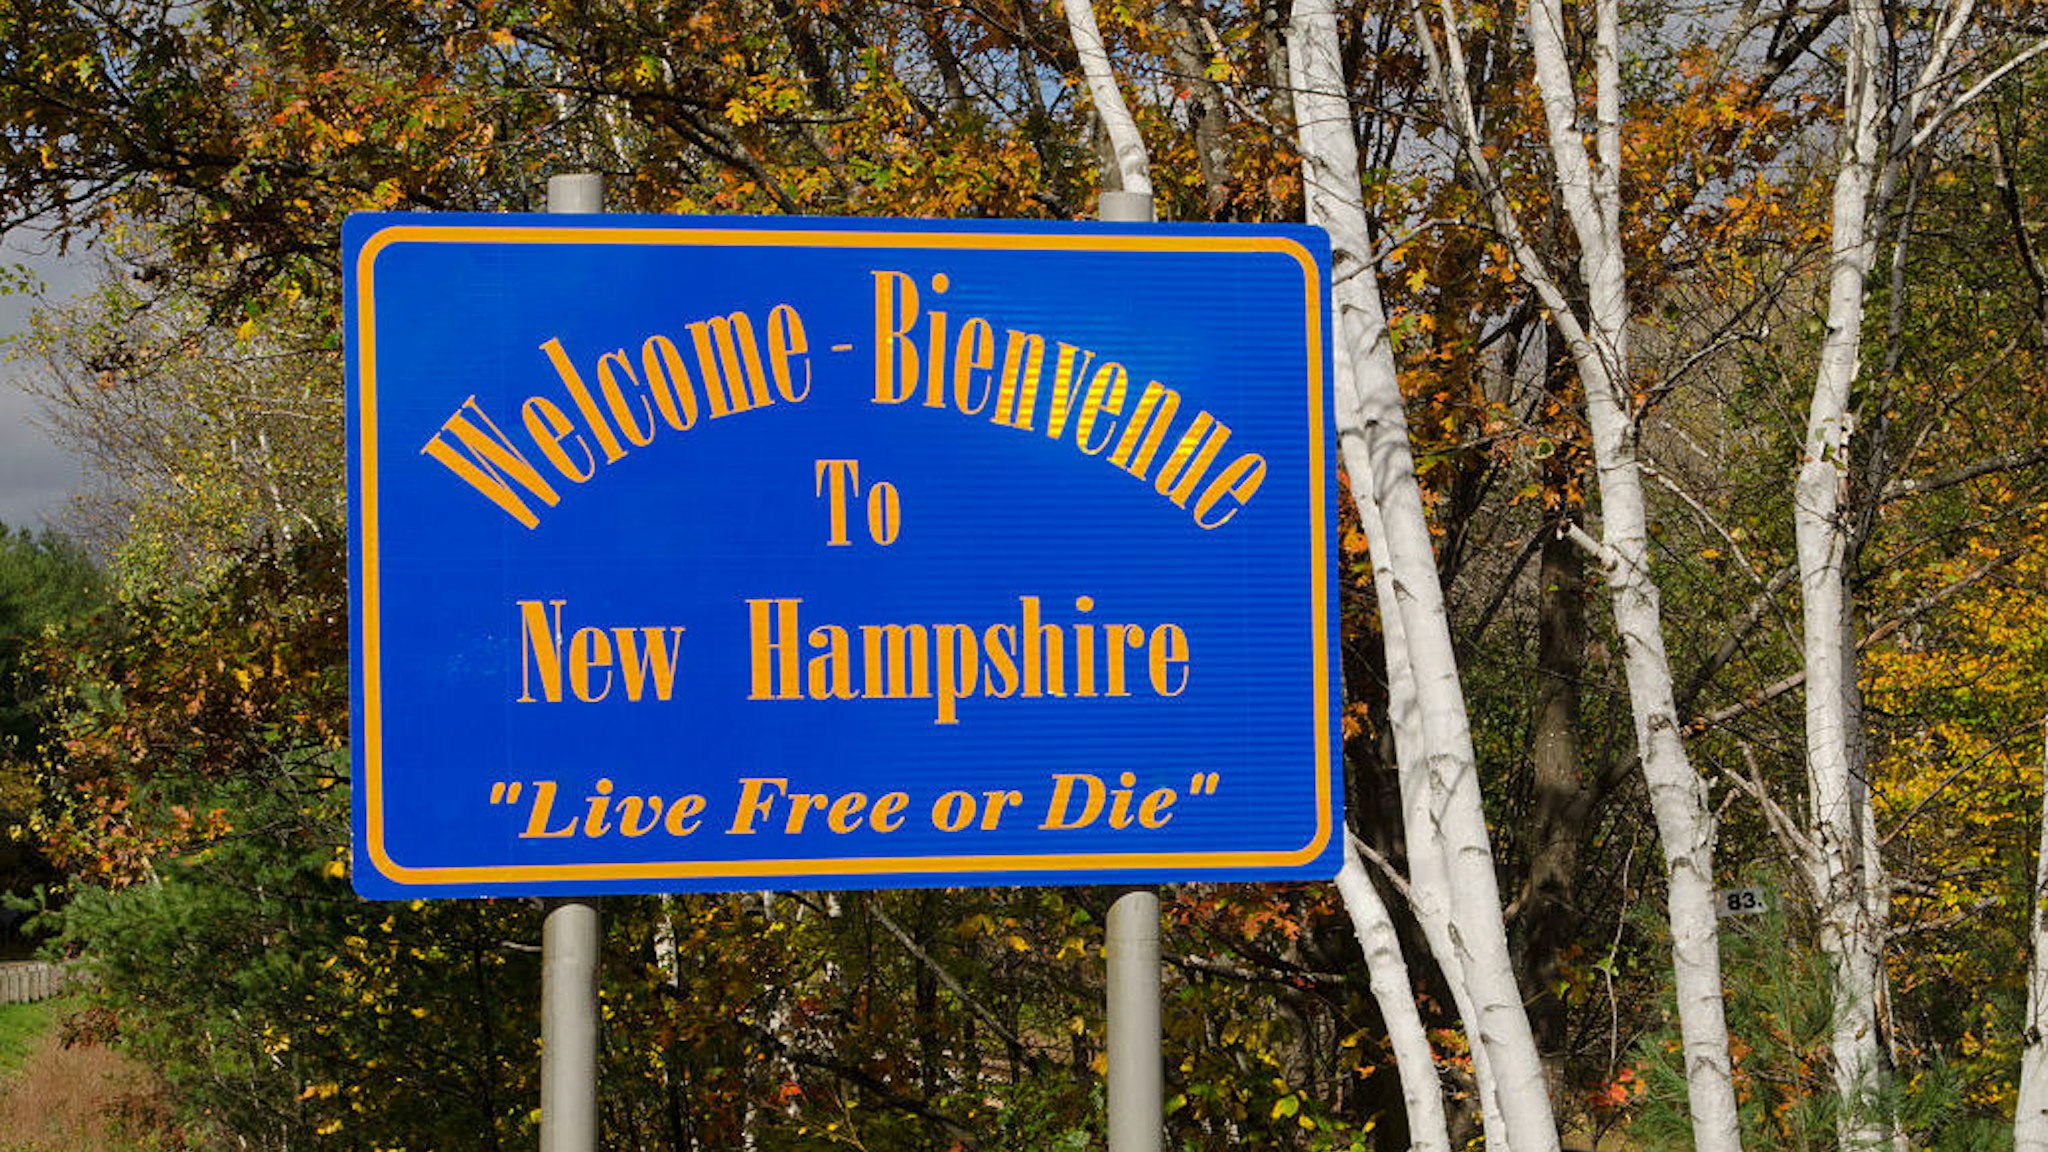 Welcome to New Hampshire sign in Northern New England in fall foliage